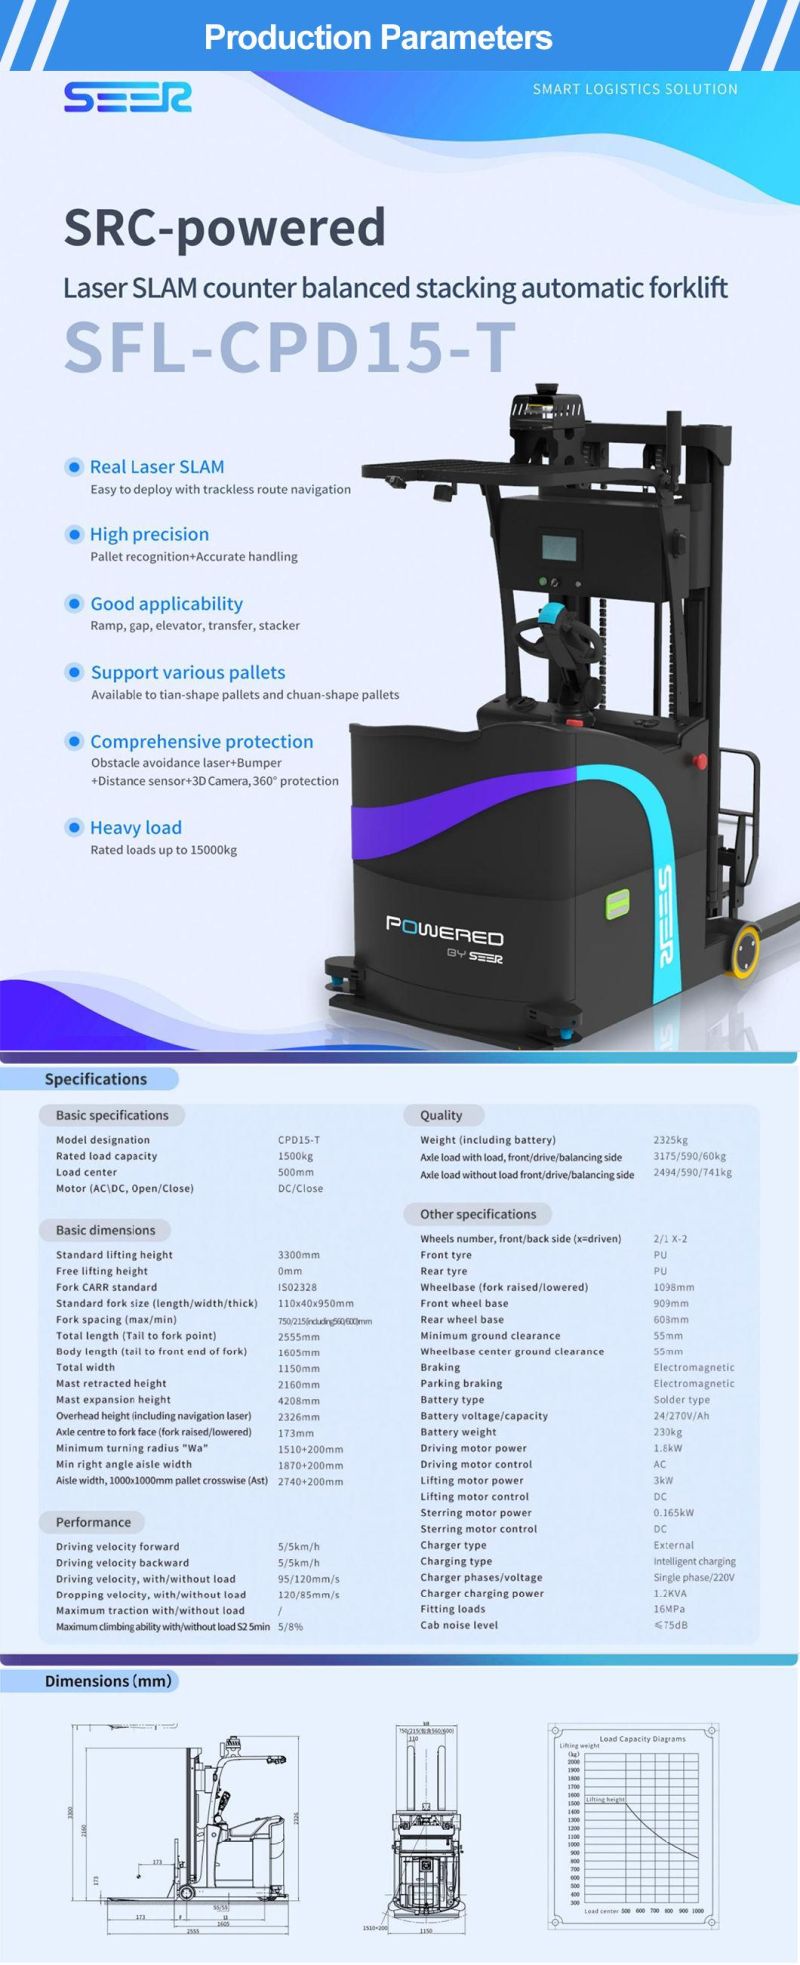 Reliable Supplier Intelligence Src-Powered Laser Slam Small Stacker Forklift Sfl-Cdd14 with Reliable Performance